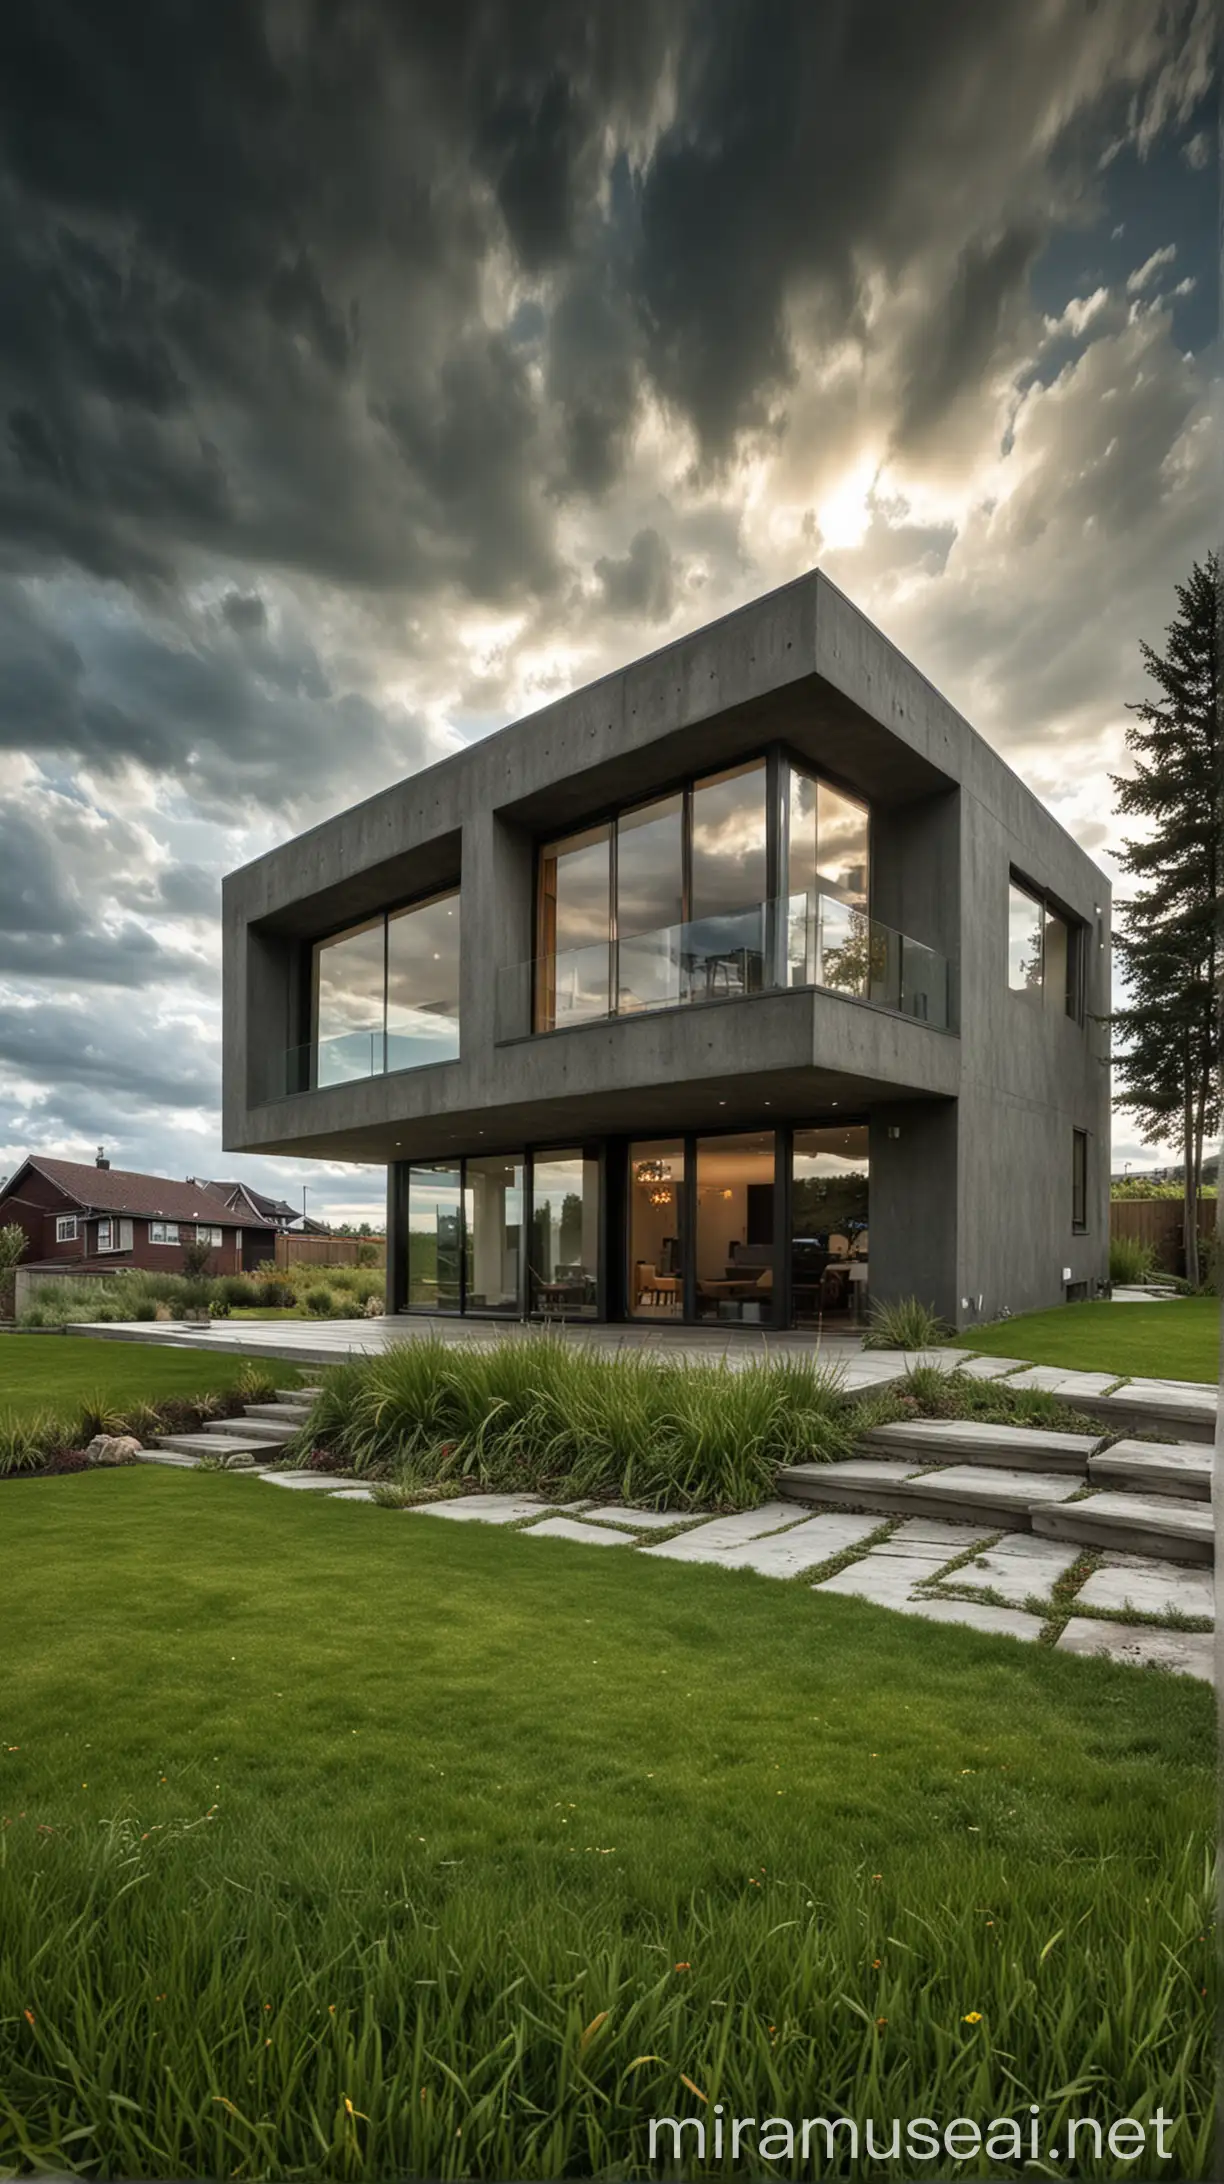 i want a same modern house thats bright and surrounded with grass, add clouds
